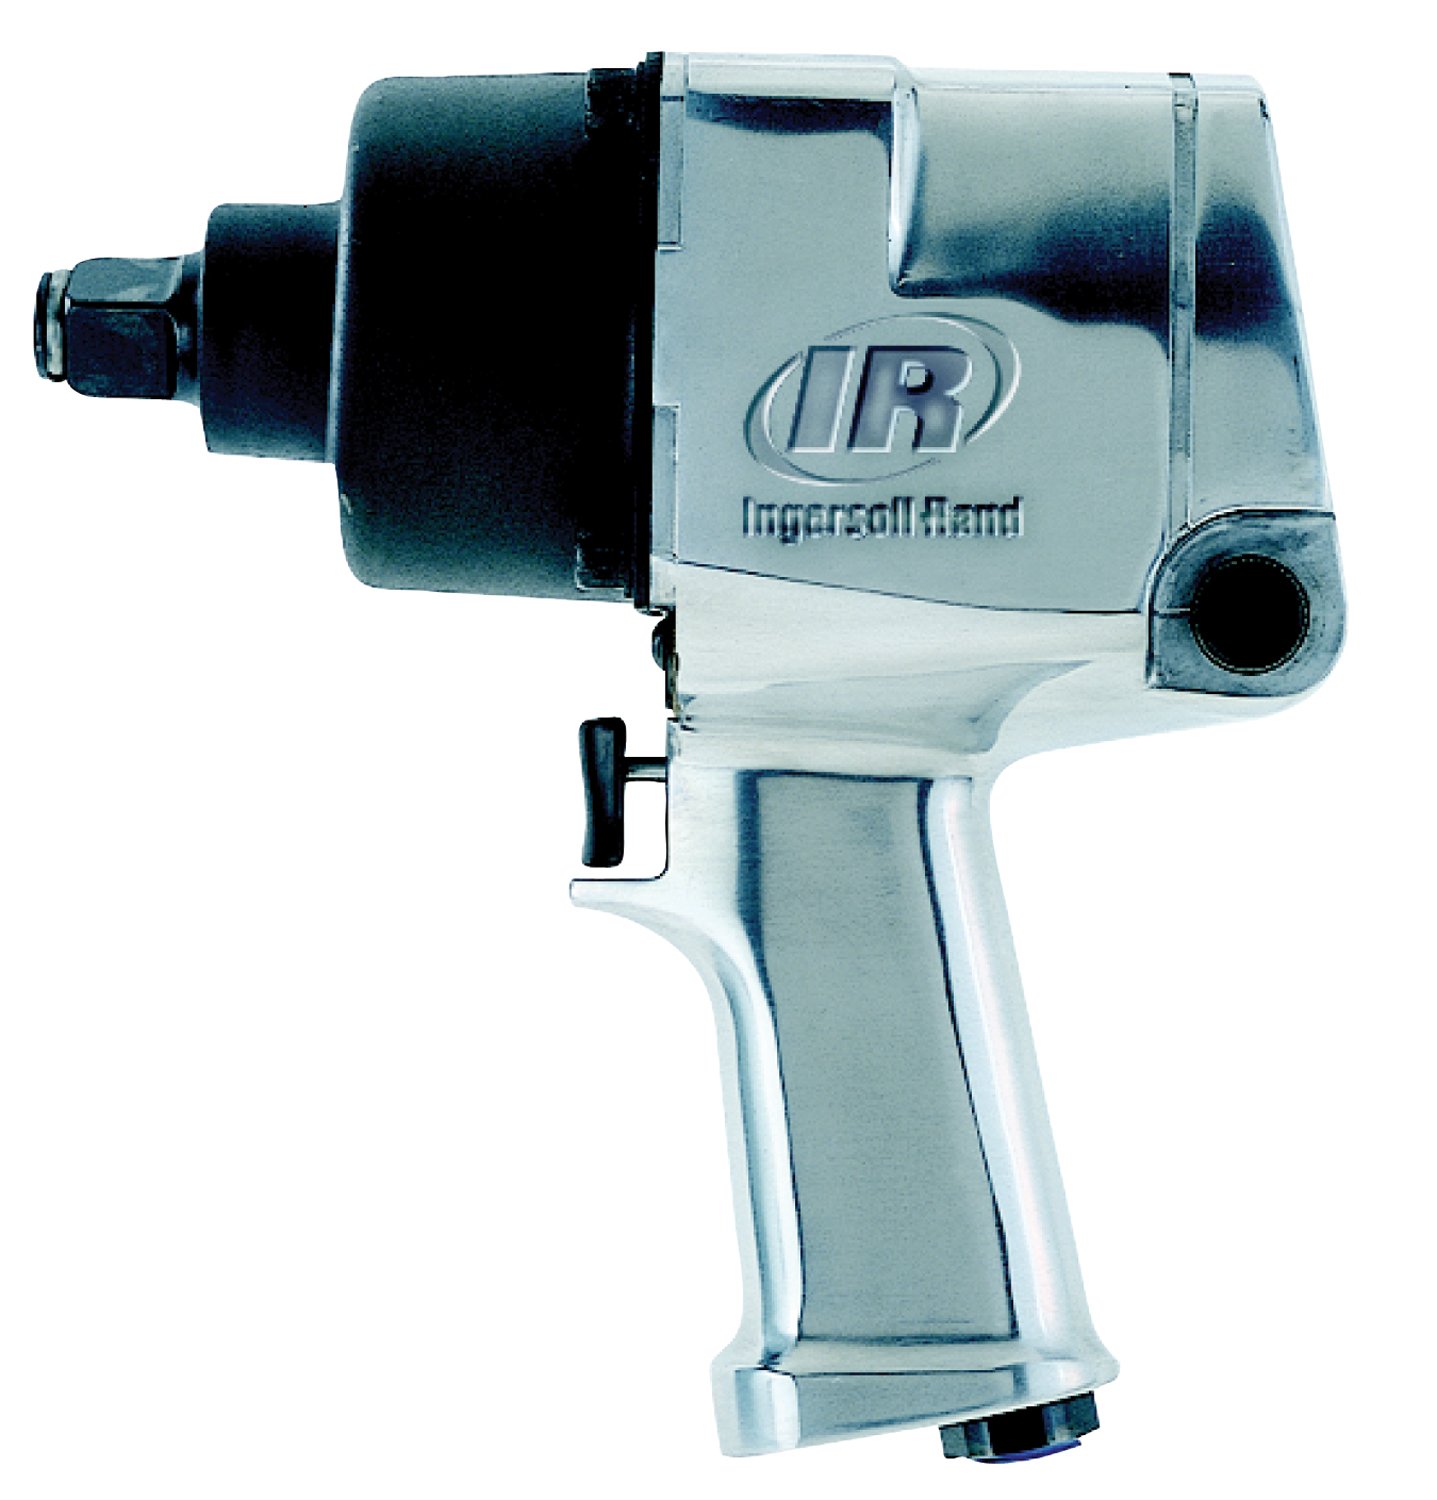 Ingersoll Rand 261 3/4-Inch Super Duty Air Impact Wrench - High Torque Output, Handle Exhaust, Pressure-Feed Lube System, Hammer Impact Mechanism, Silver